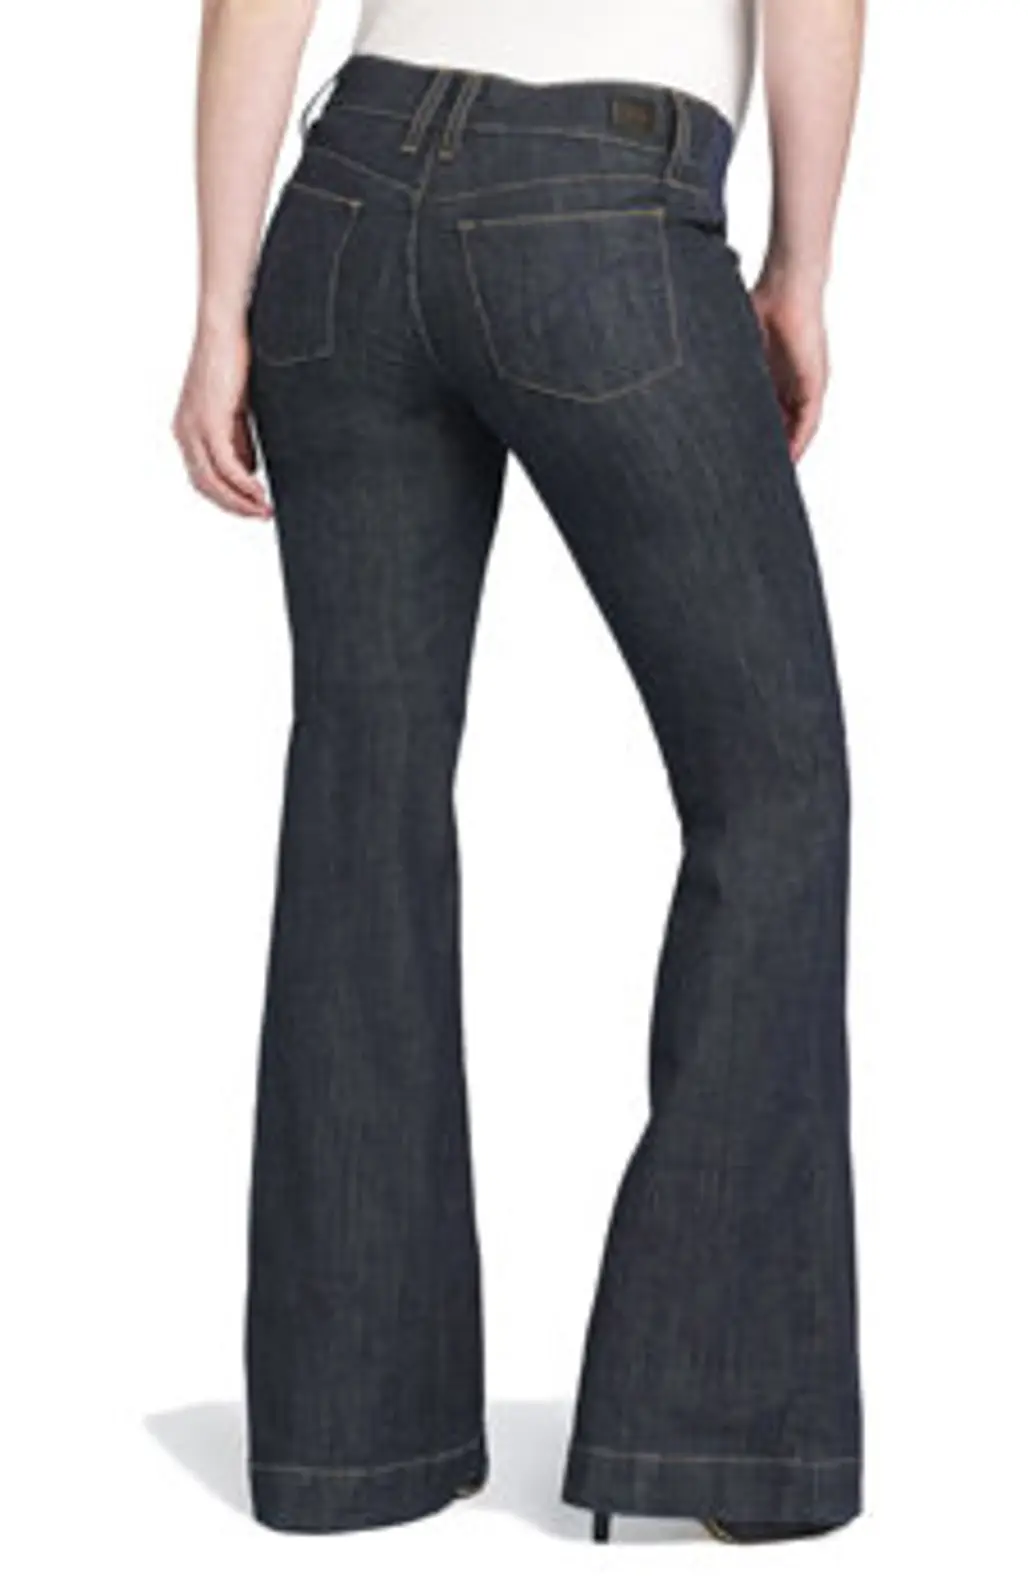 Juicy Couture Maternity 'Miller' Wide Leg Jeans